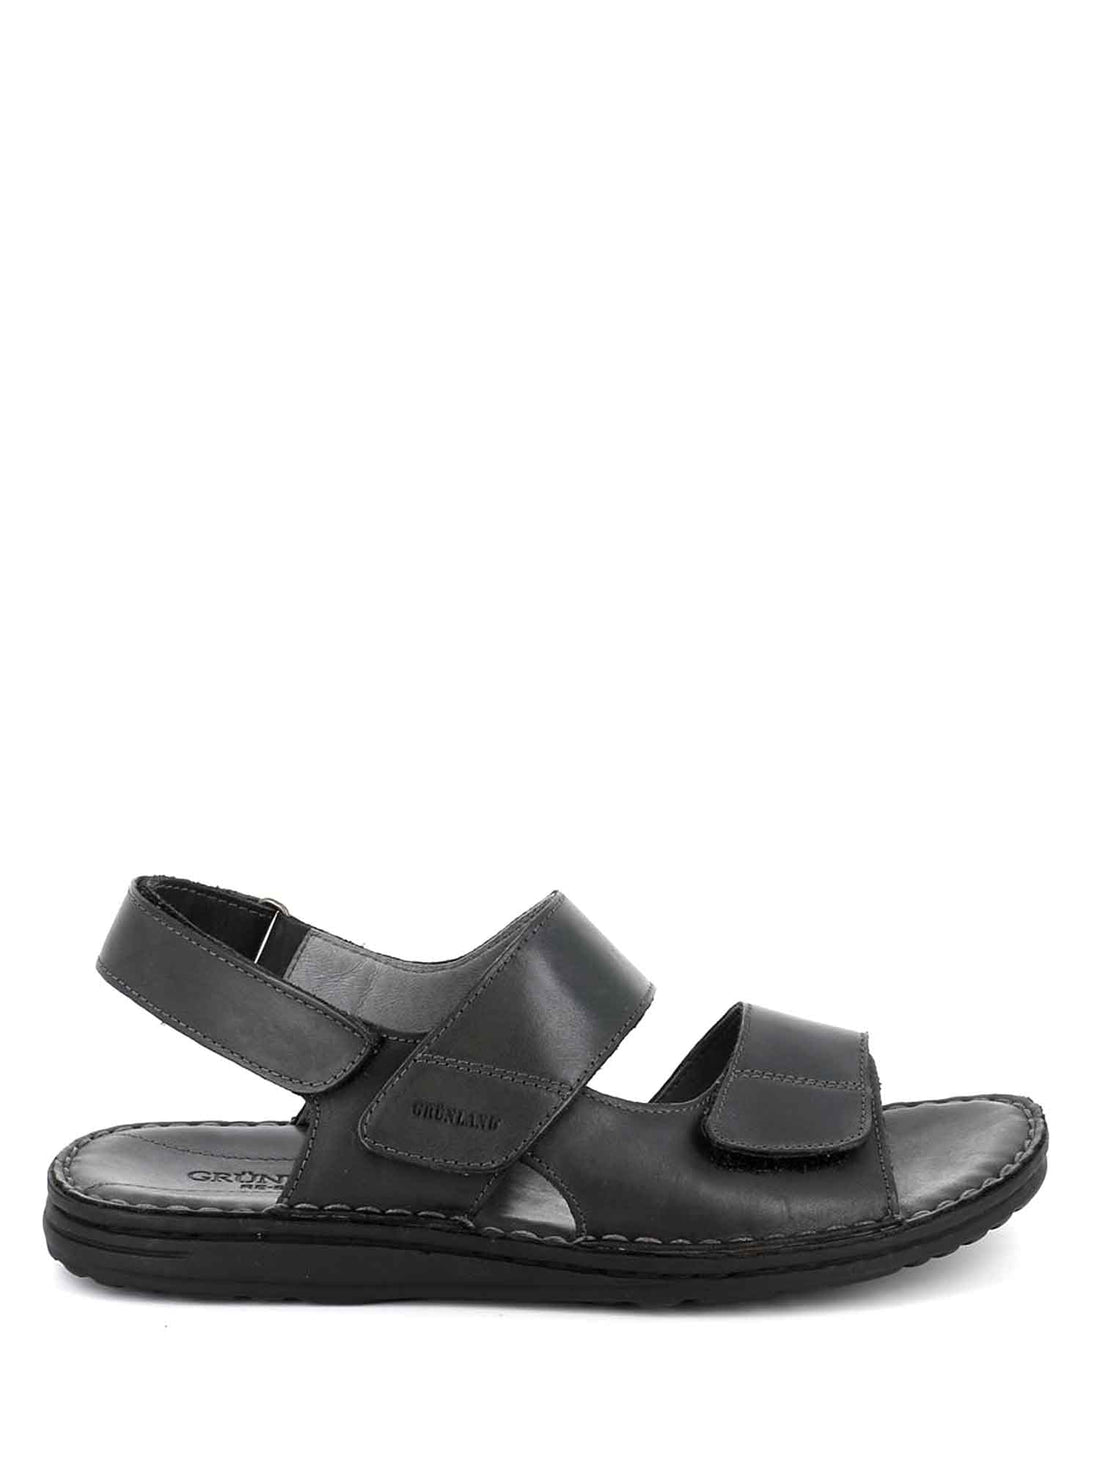 Grunland Sandals With Straps SA1241